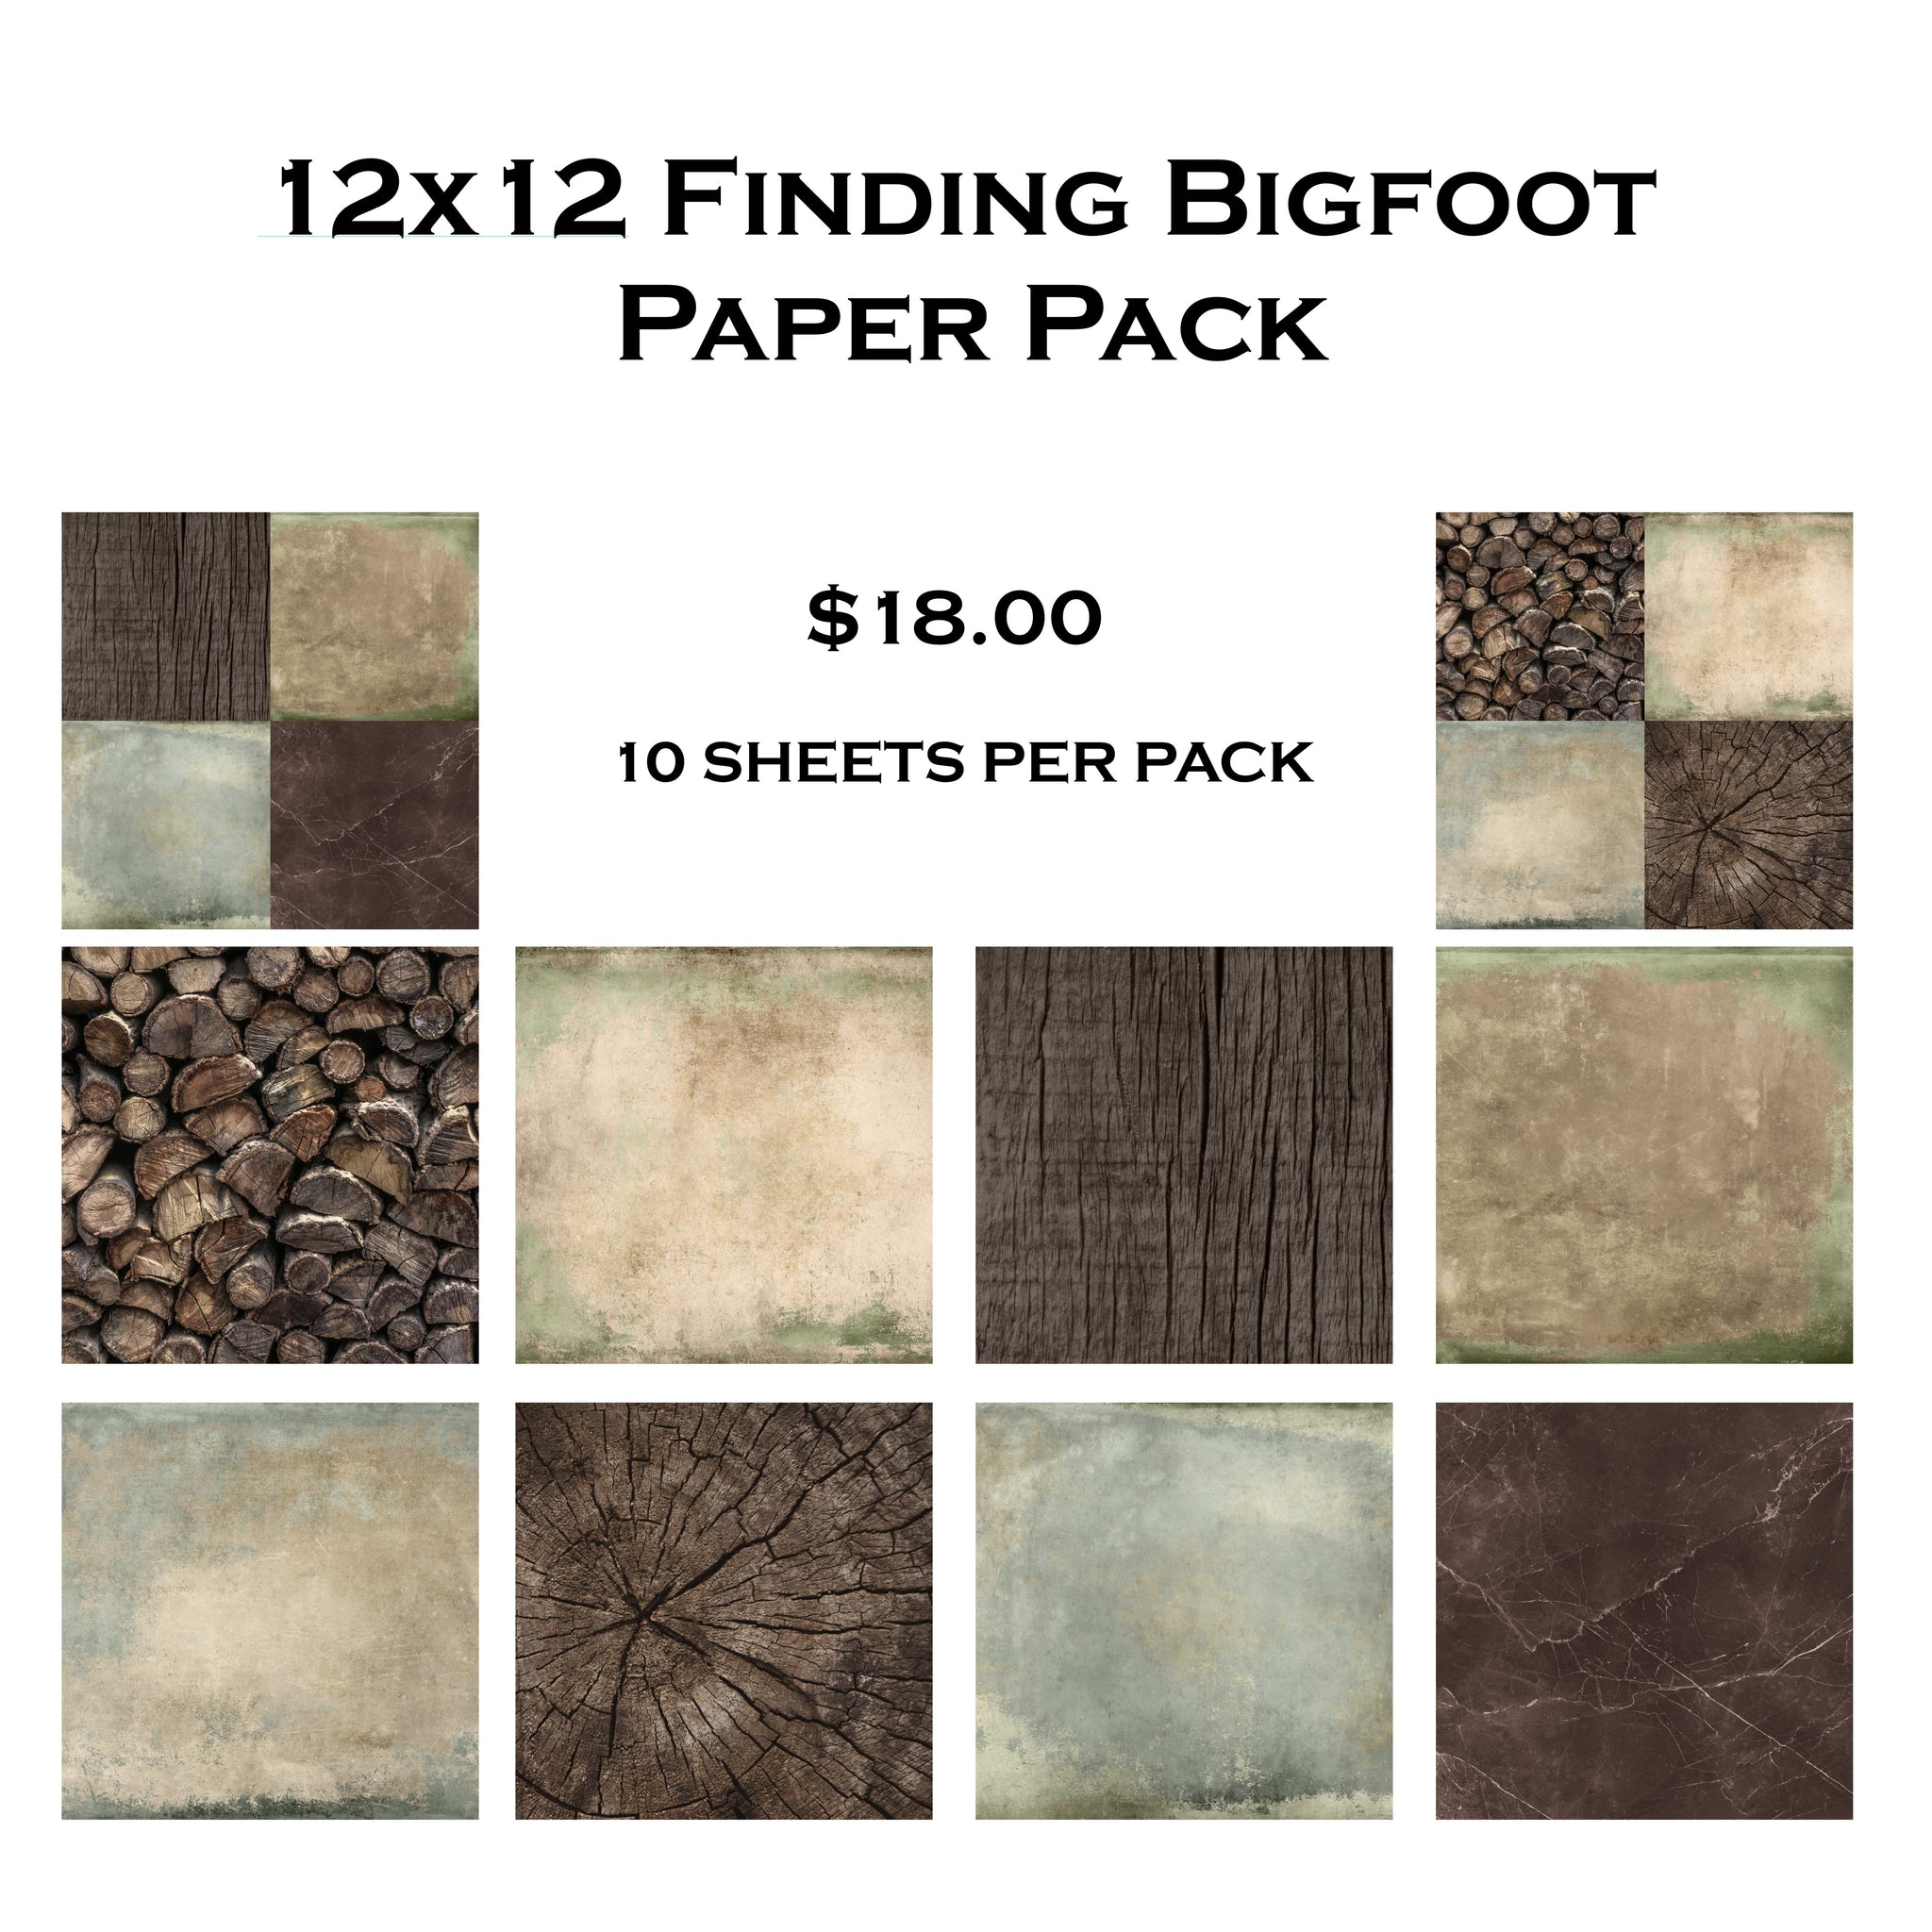 Finding Bigfoot 12x12 Paper Pack